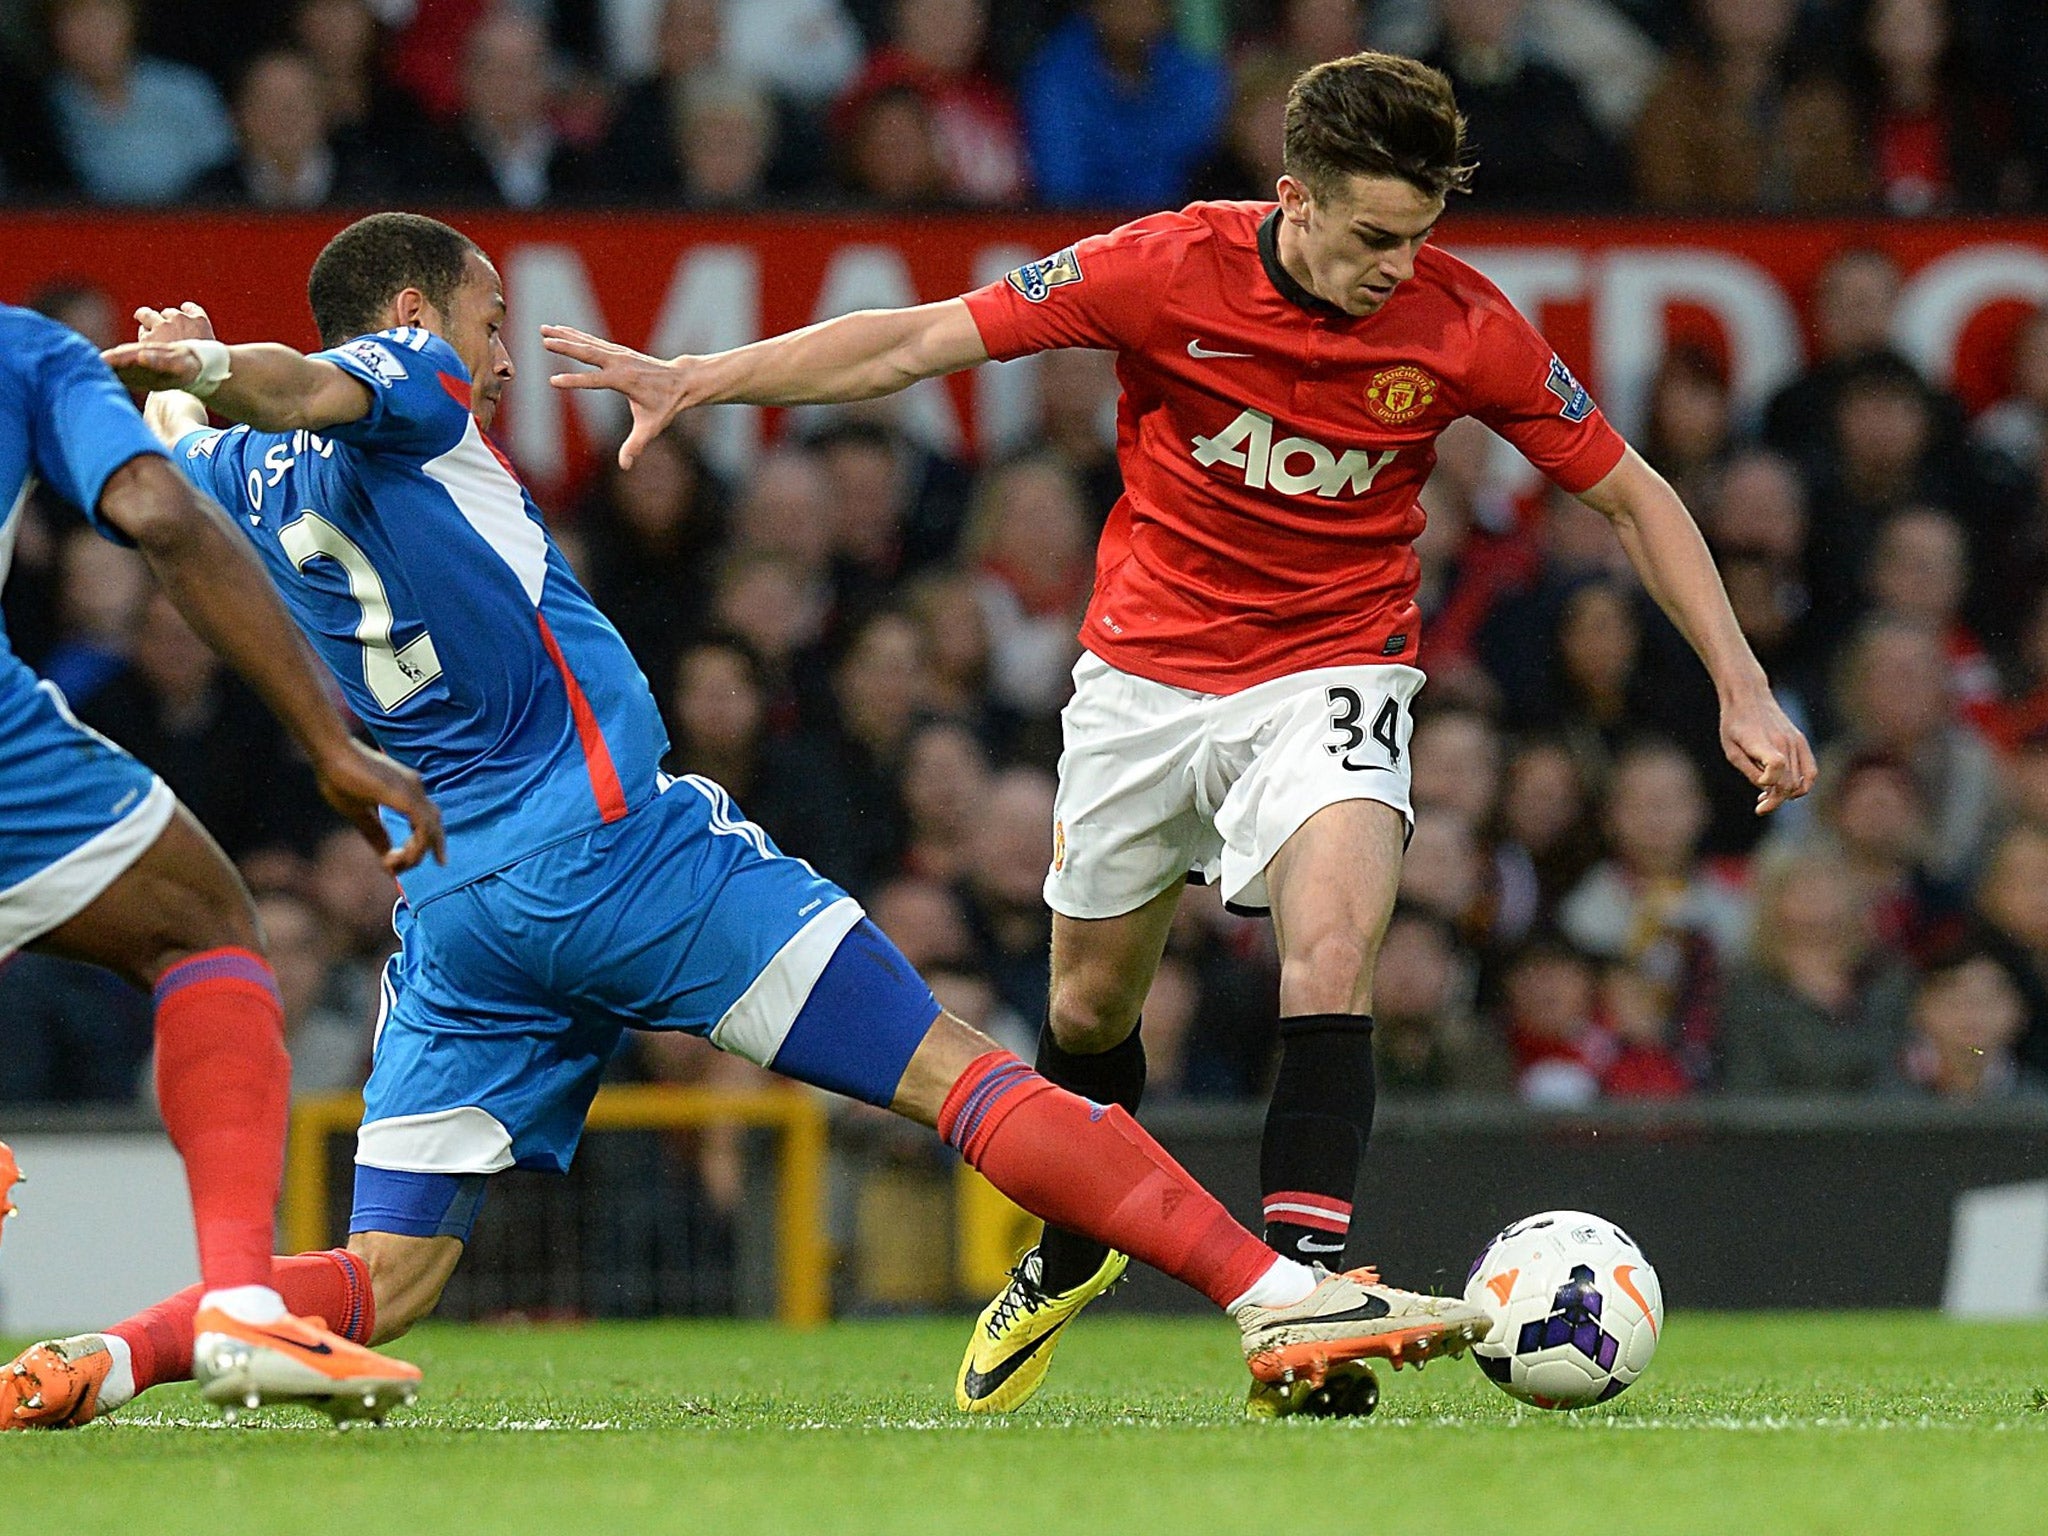 Tom Lawrence wasn't shy in taking on defenders